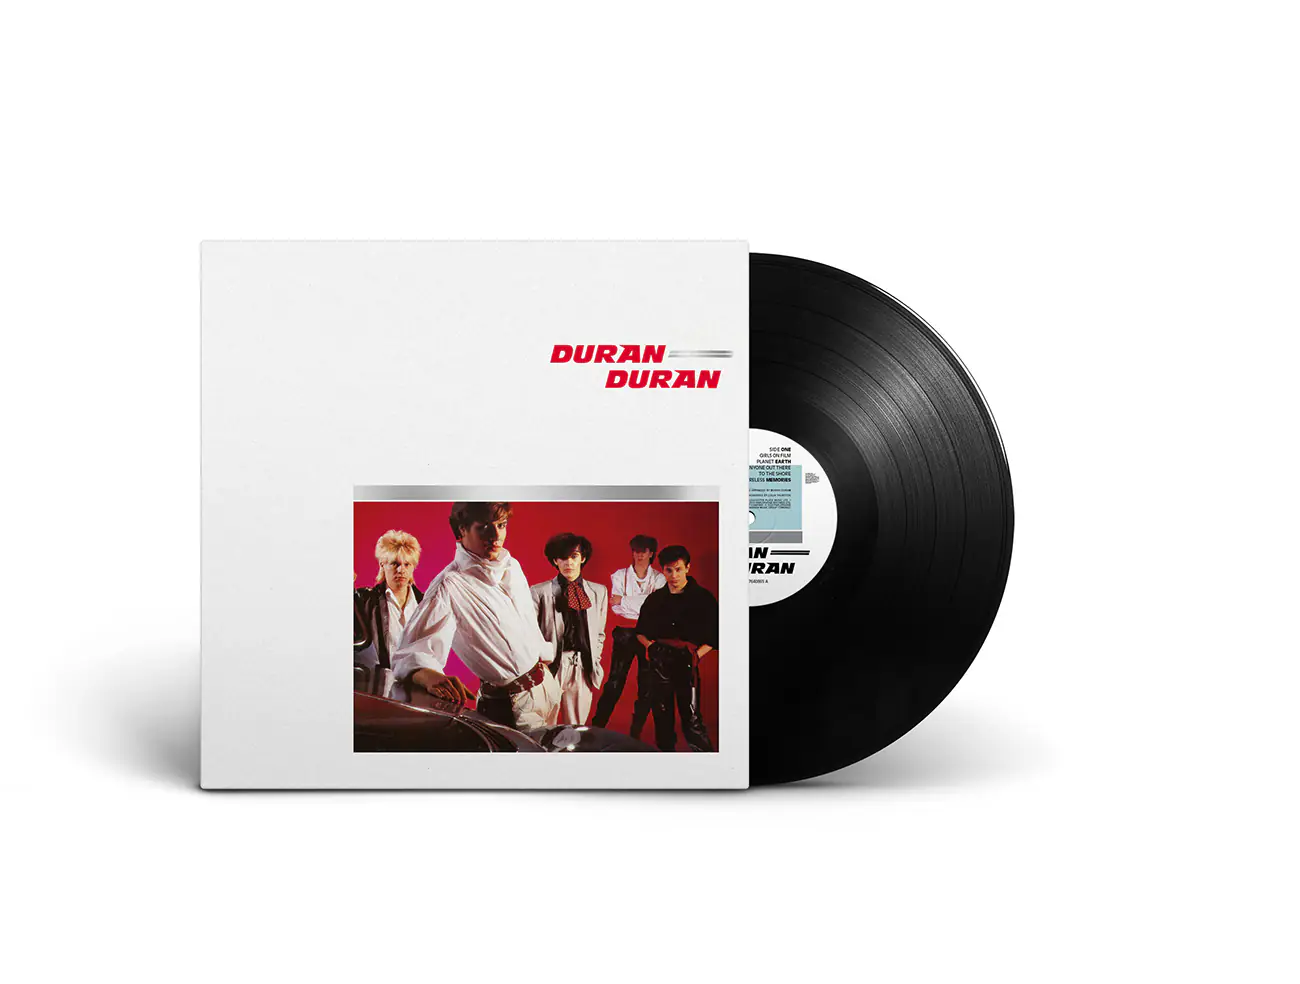 Duran Duran announces historic reissue of their first 5 studio albums on LP and CD